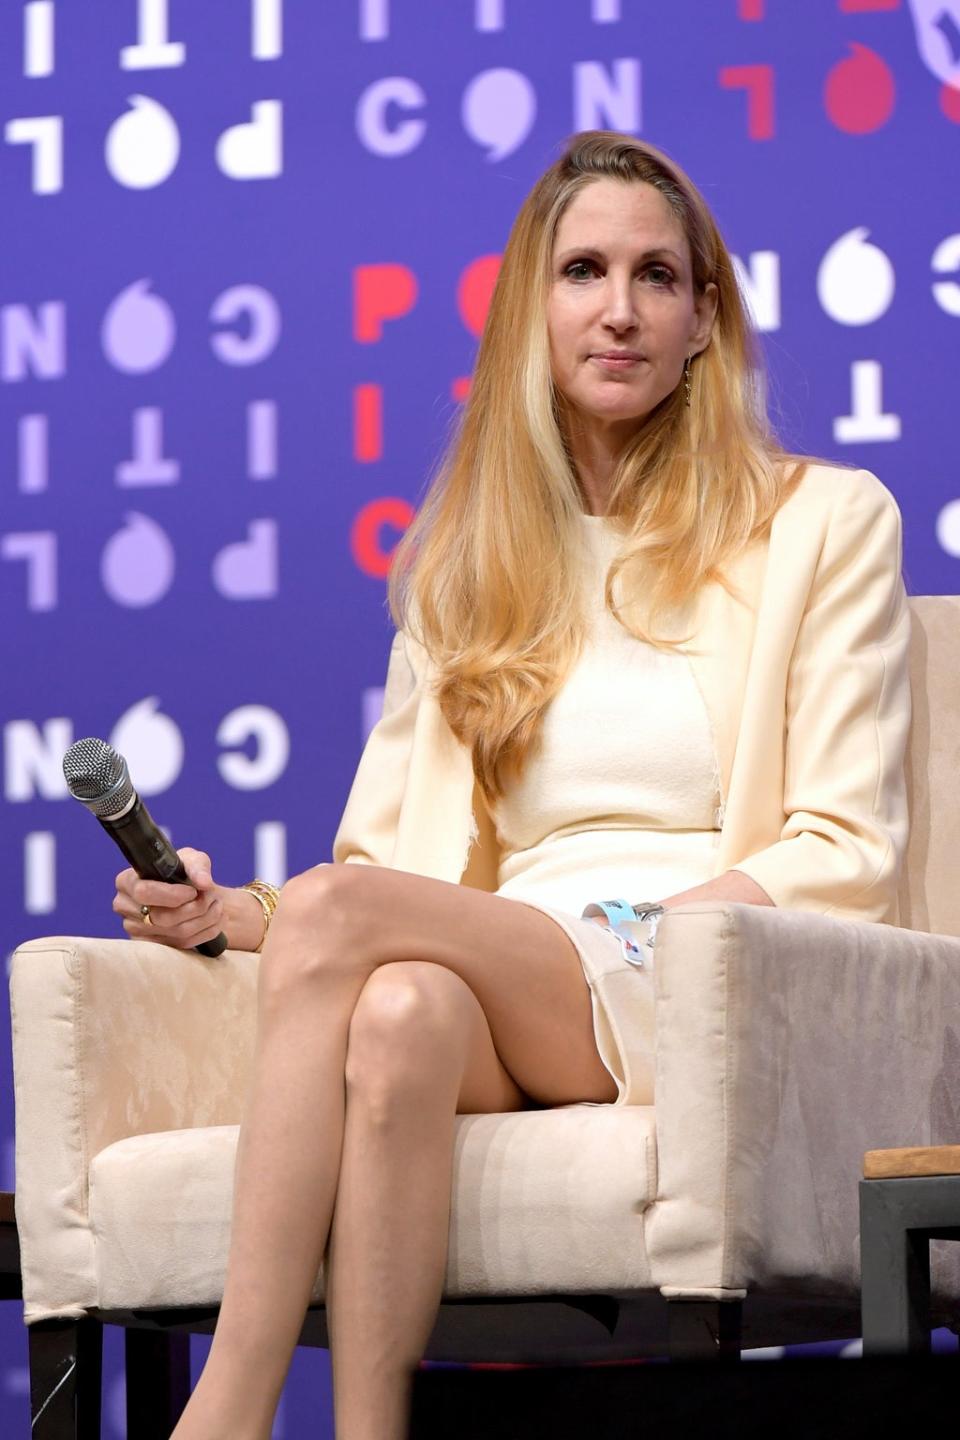 Ann Coulter speaks on stage at the 2019 Politicon at Music City Center on 26 October 2019 in Nashville, Tennessee (Jason Kempin/Getty Images for Politicon)